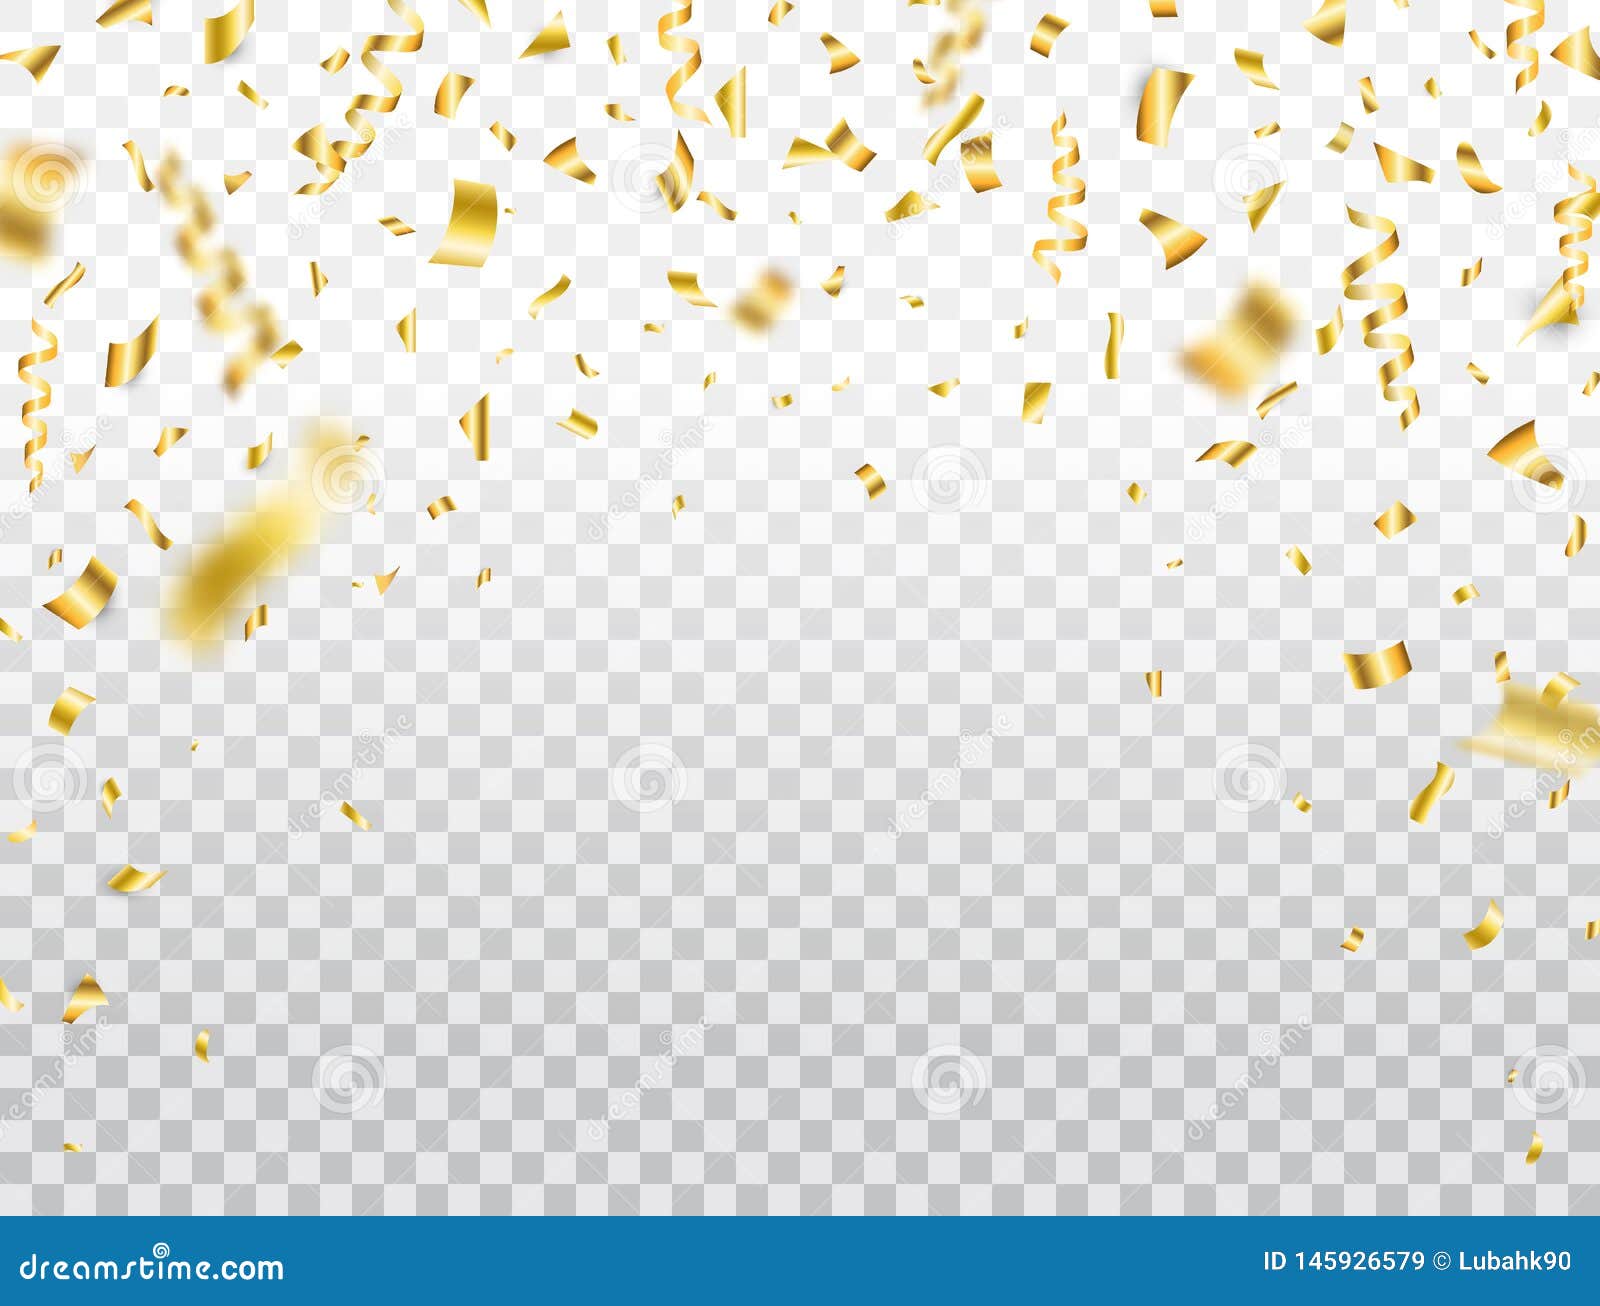 Confetti Falling PNG Transparent Images Free Download